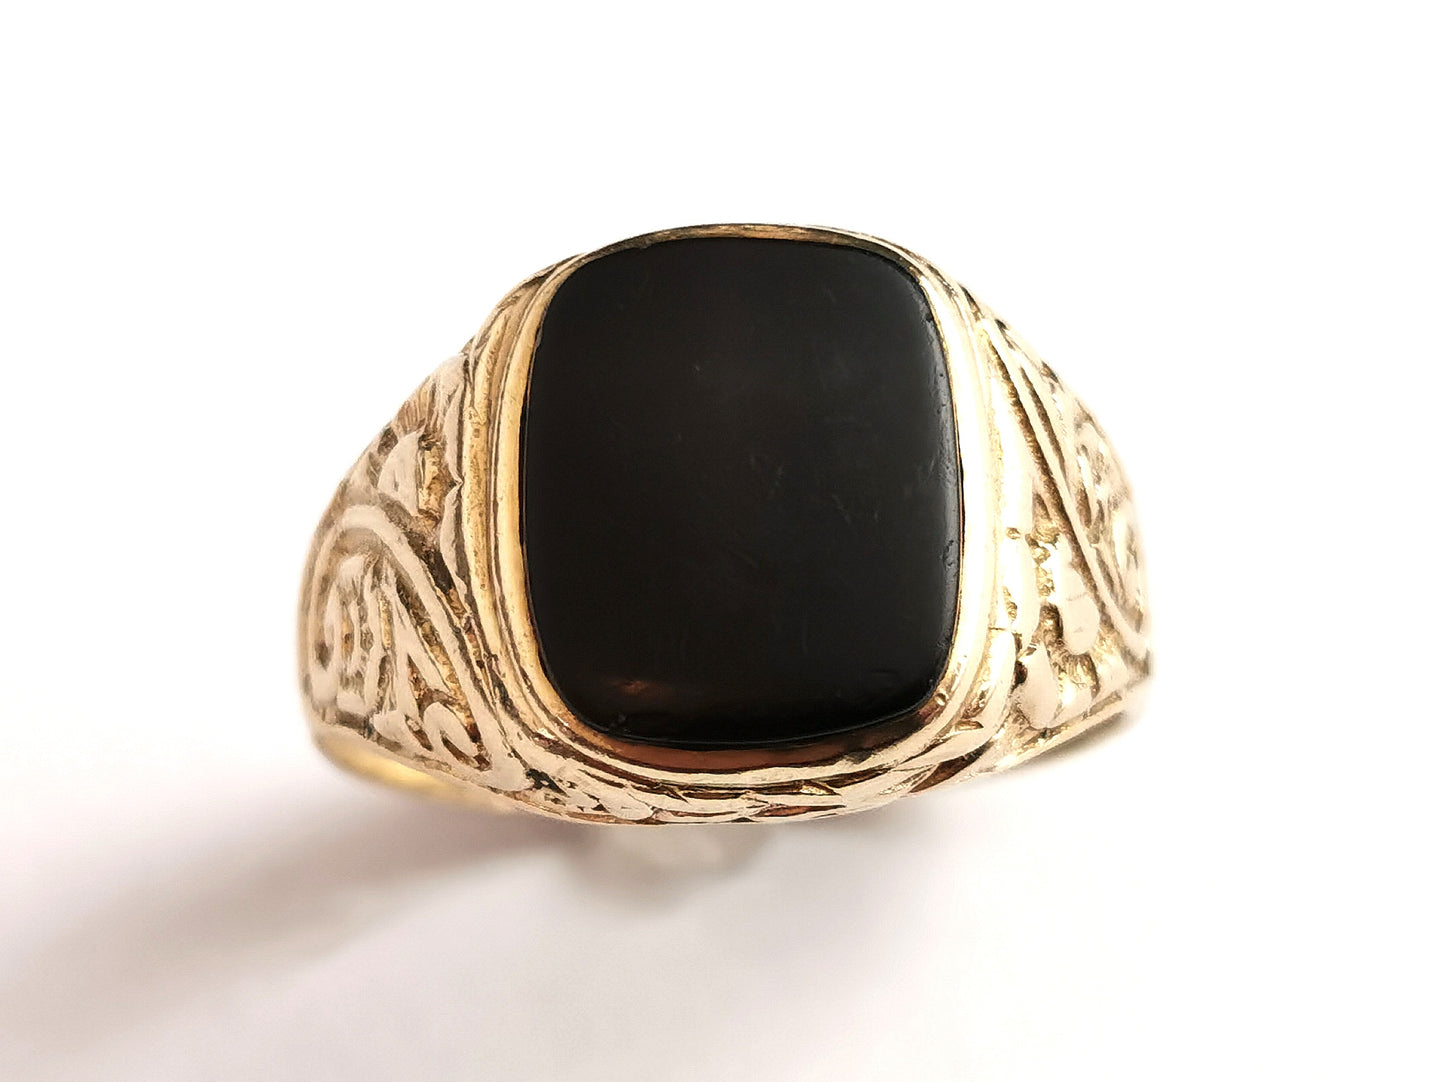 Vintage Onyx signet ring, 9ct yellow gold, Floral